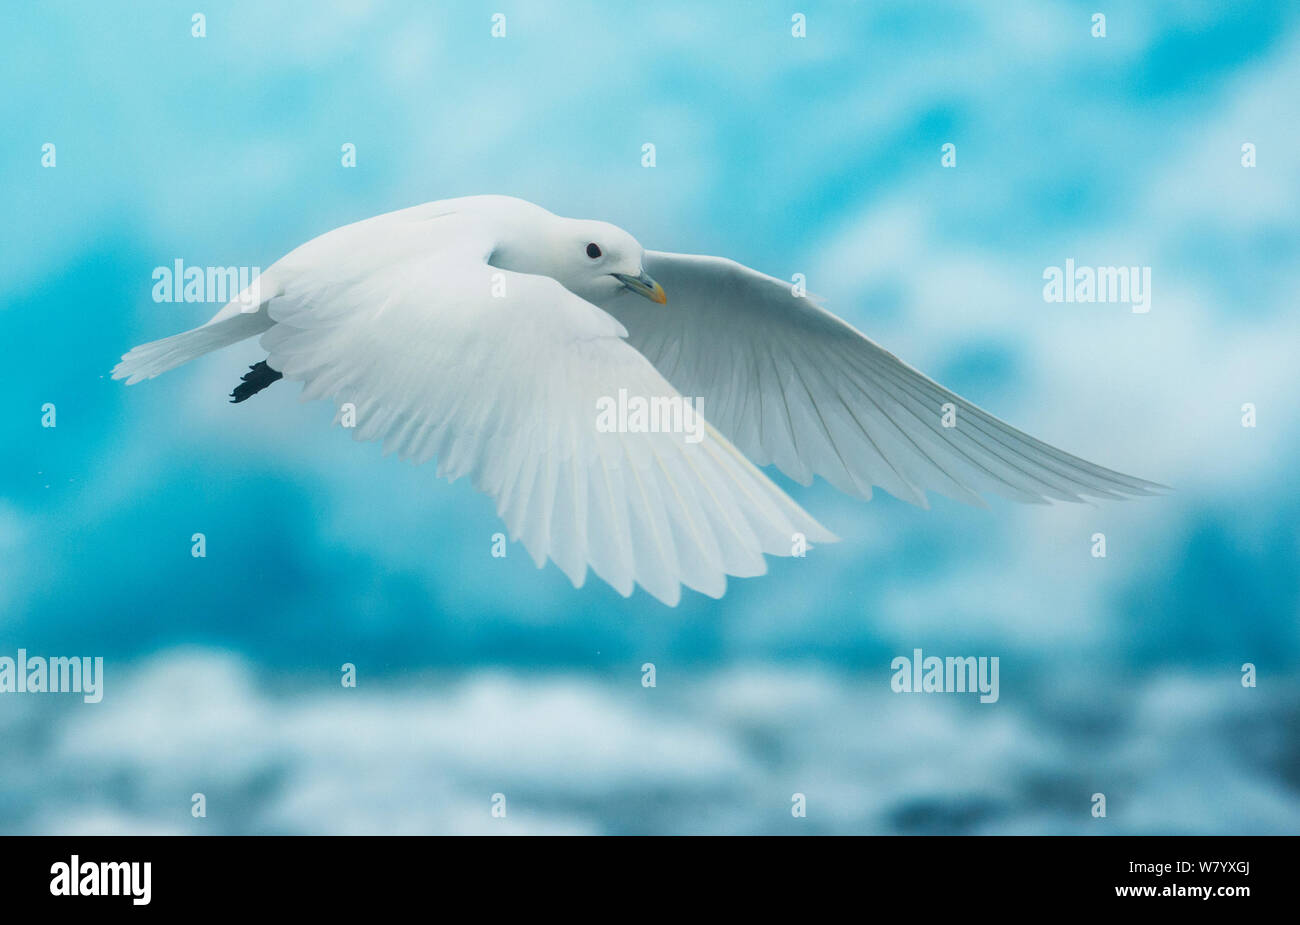 Ivory gull (Pagophila eburnea) in flight in front of blue ice, Svalbard, Norway. July. Stock Photo